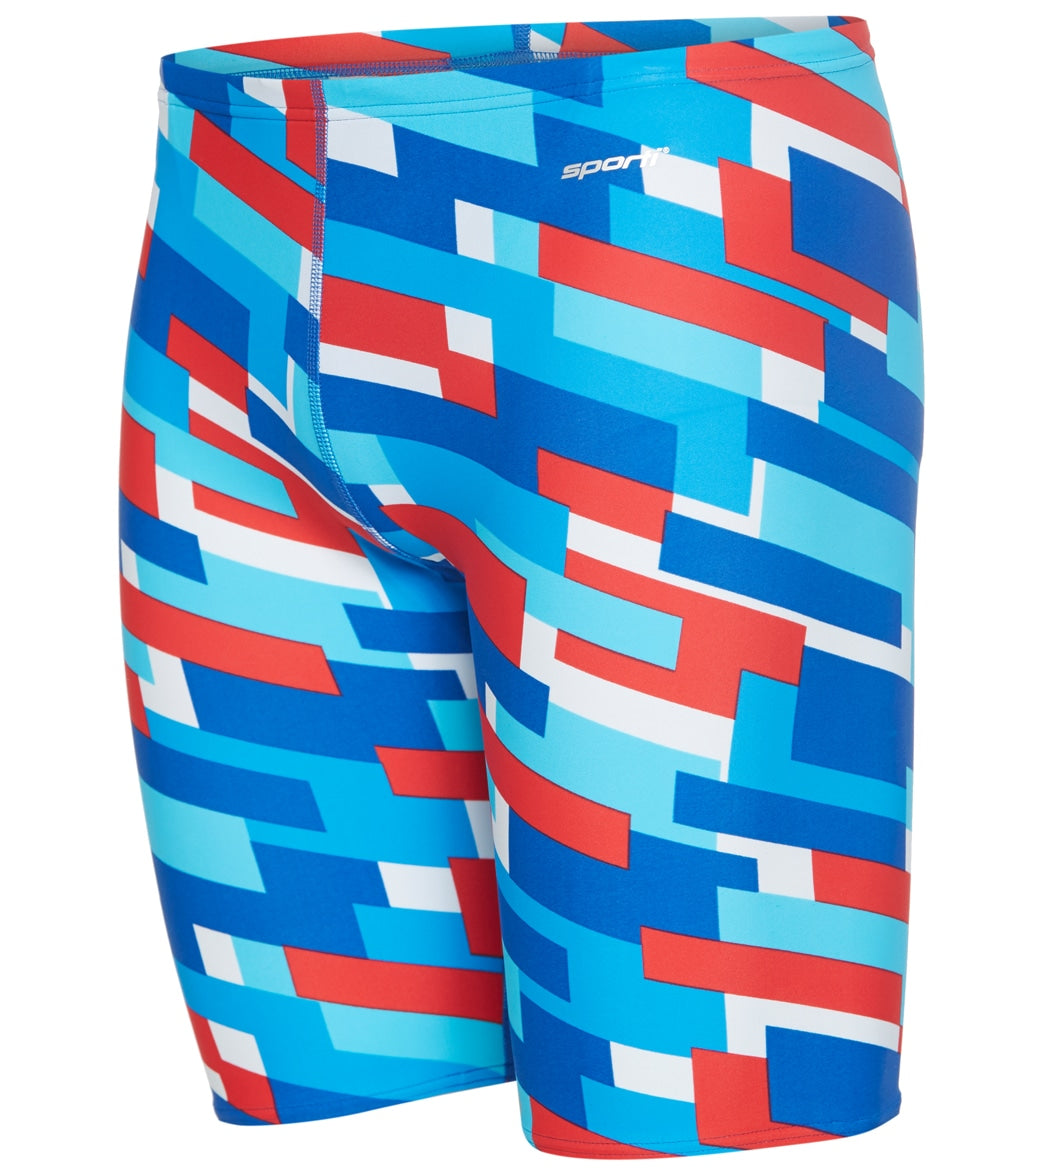 Sporti Cubism Usa Jammer Swimsuit - Red/White/Blue 36 - Swimoutlet.com